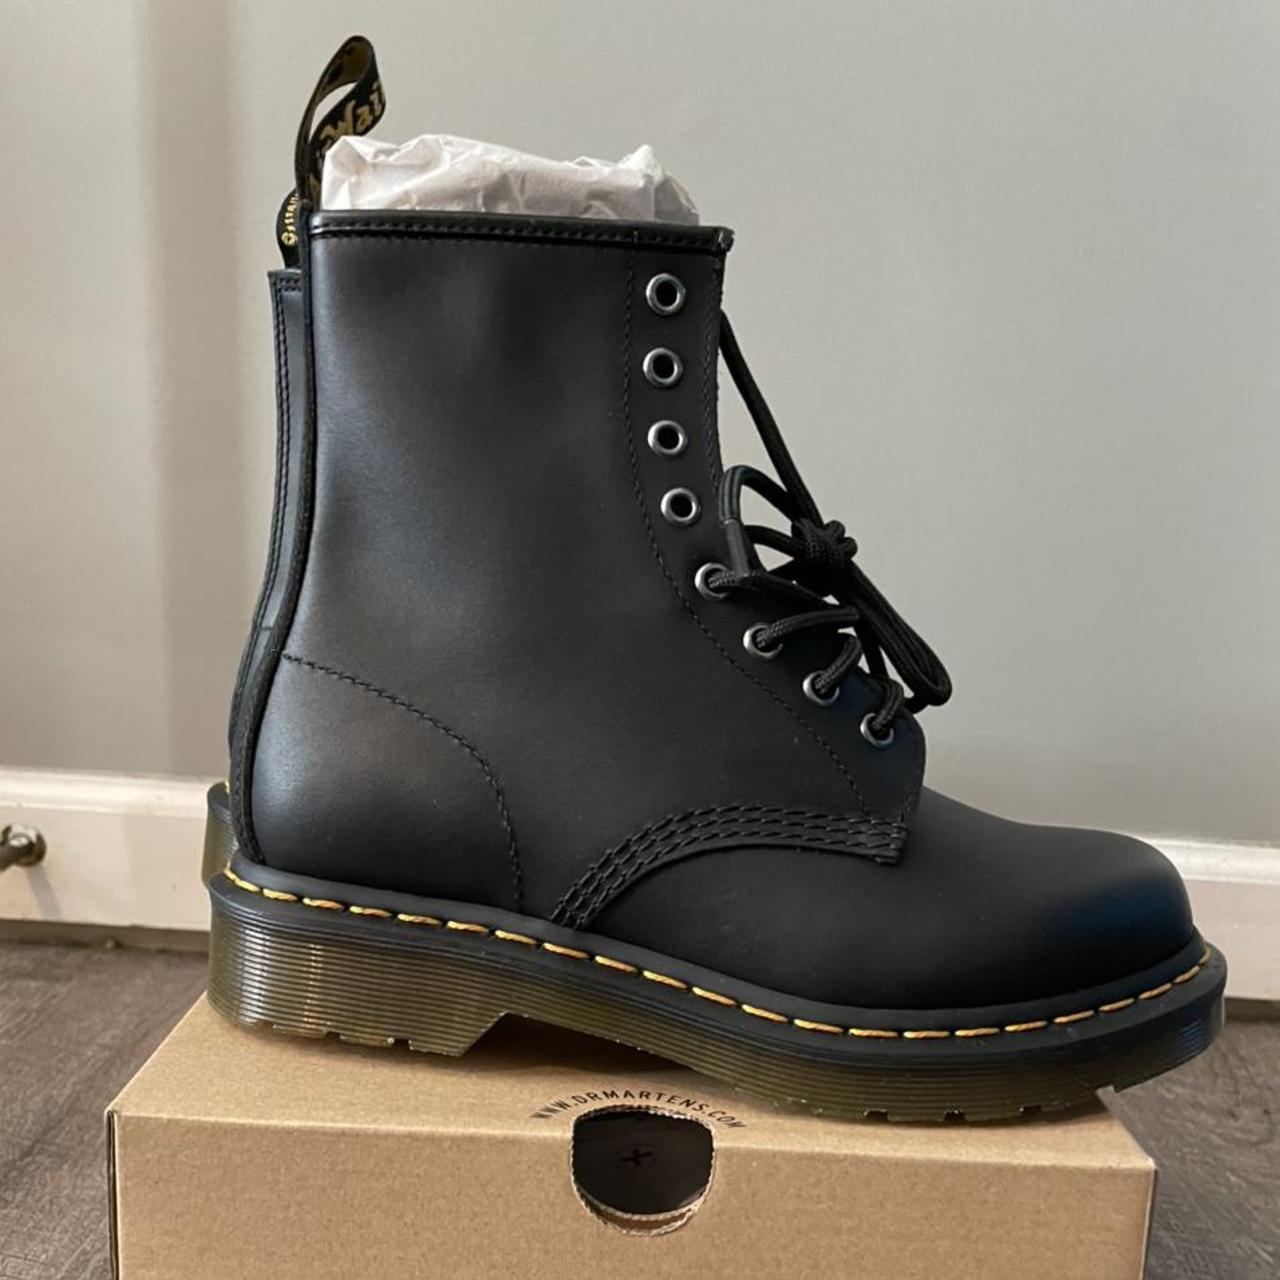 Dr. Martens 1460 WOMEN'S SMOOTH LEATHER LACE UP... - Depop